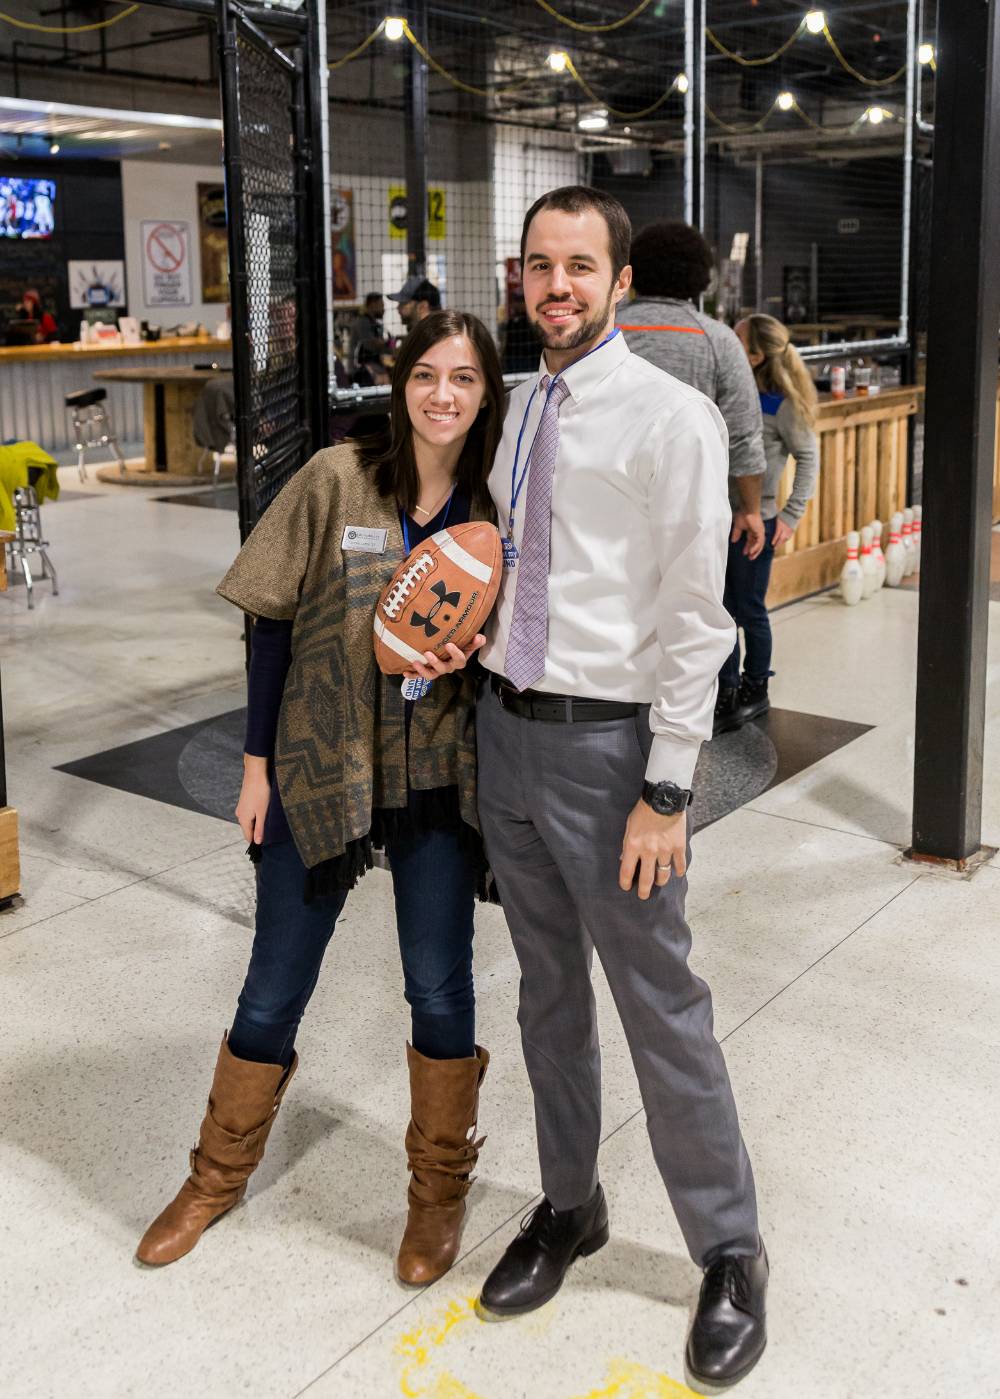 Two alumni pose holding a football at the Fowling Fun Event